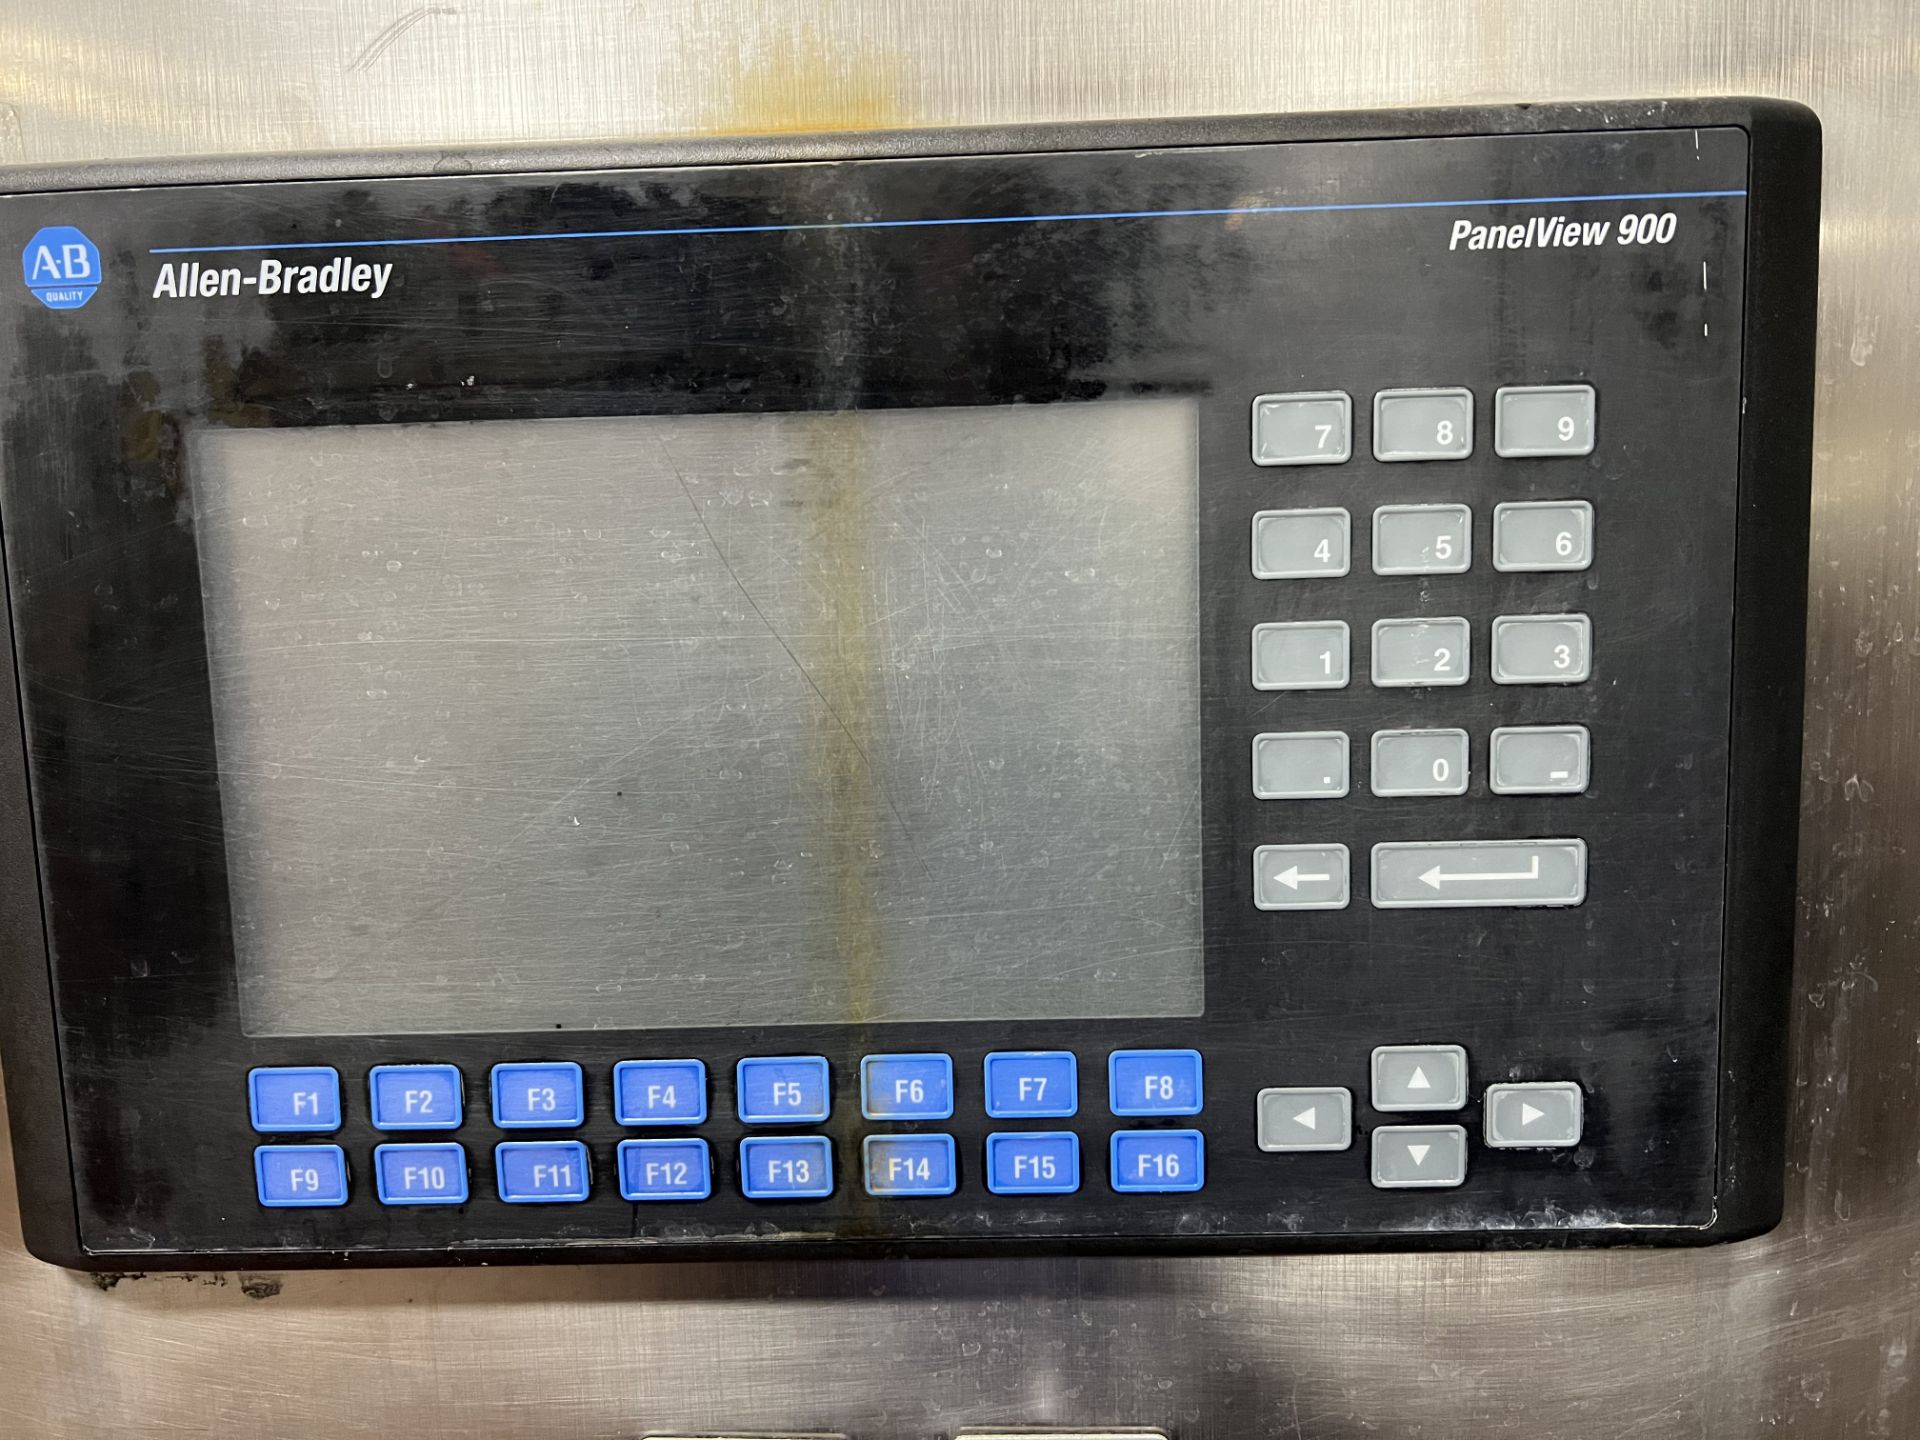 Allen-Bradley PanelView 900 Touch Screen Display, Allen-Bradley PLC with (6) I/O Cards, (2) - Image 6 of 7